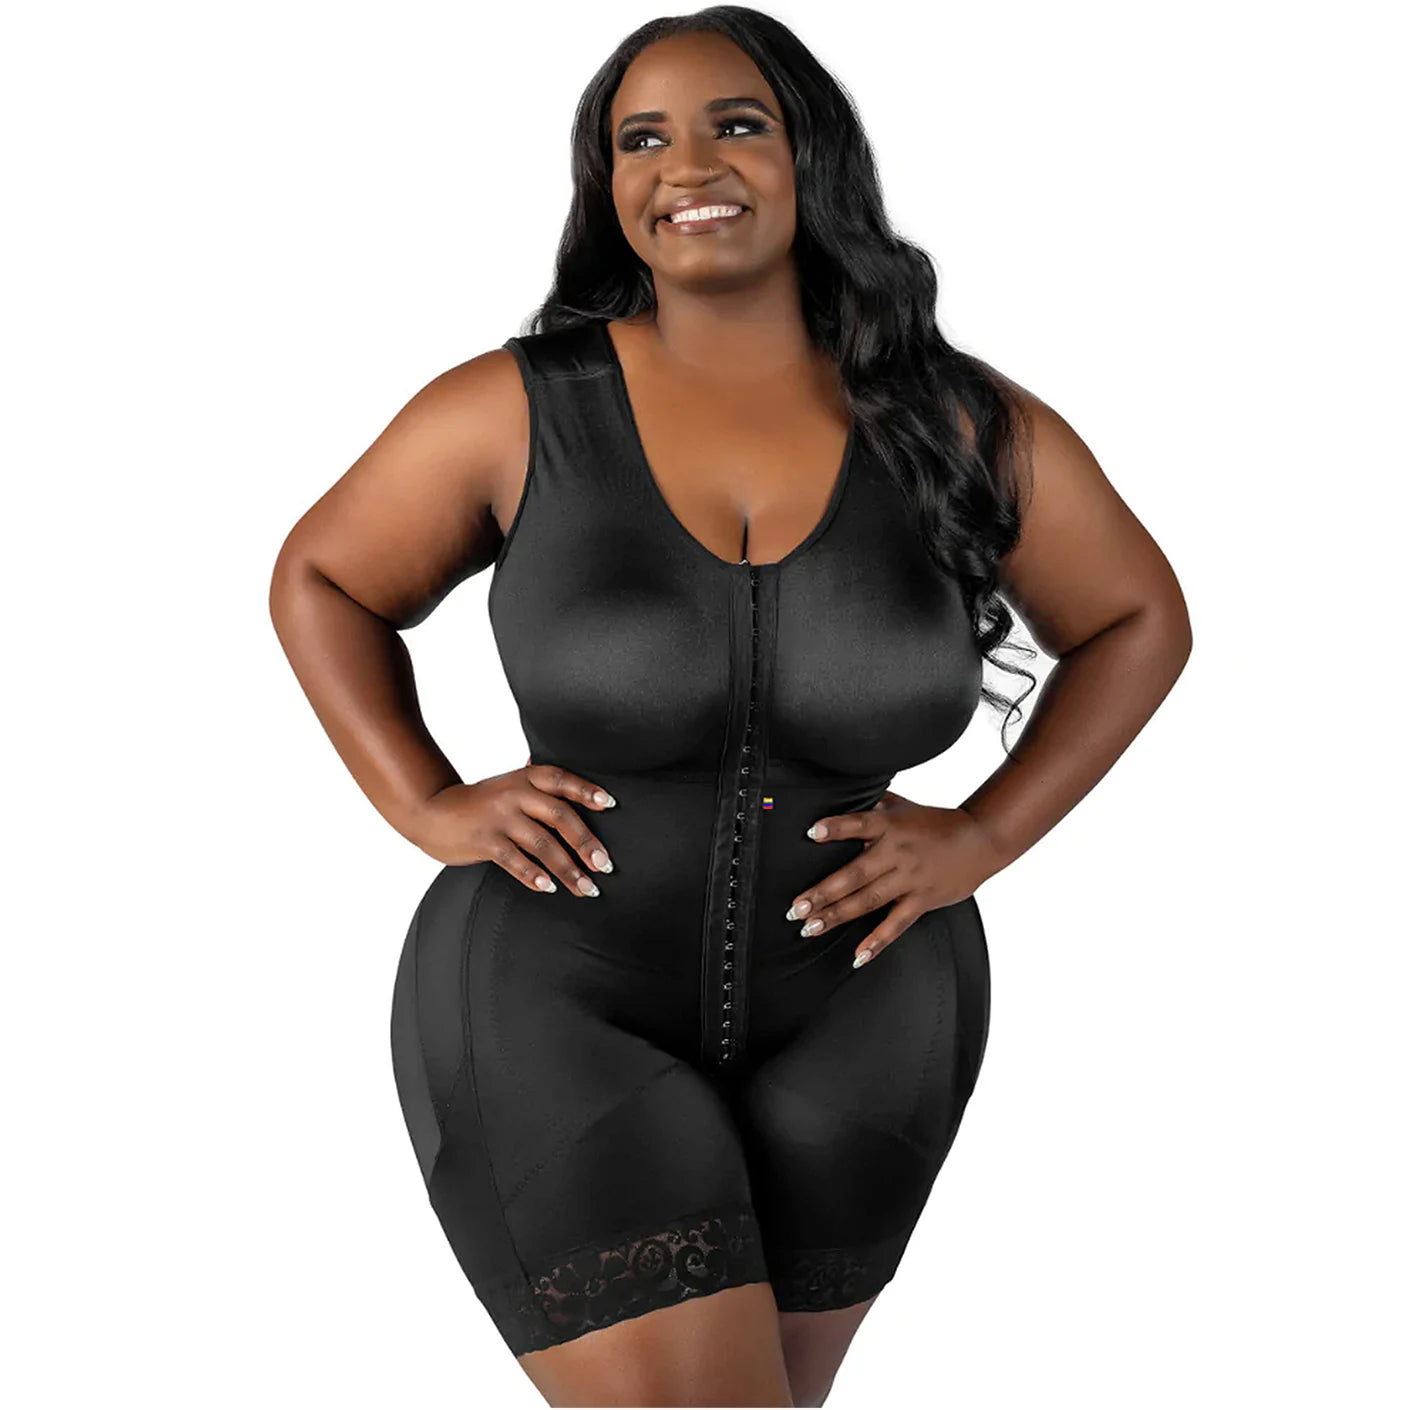 Women's Shapewear Solutions Curve Shaping Bodies Lingerie